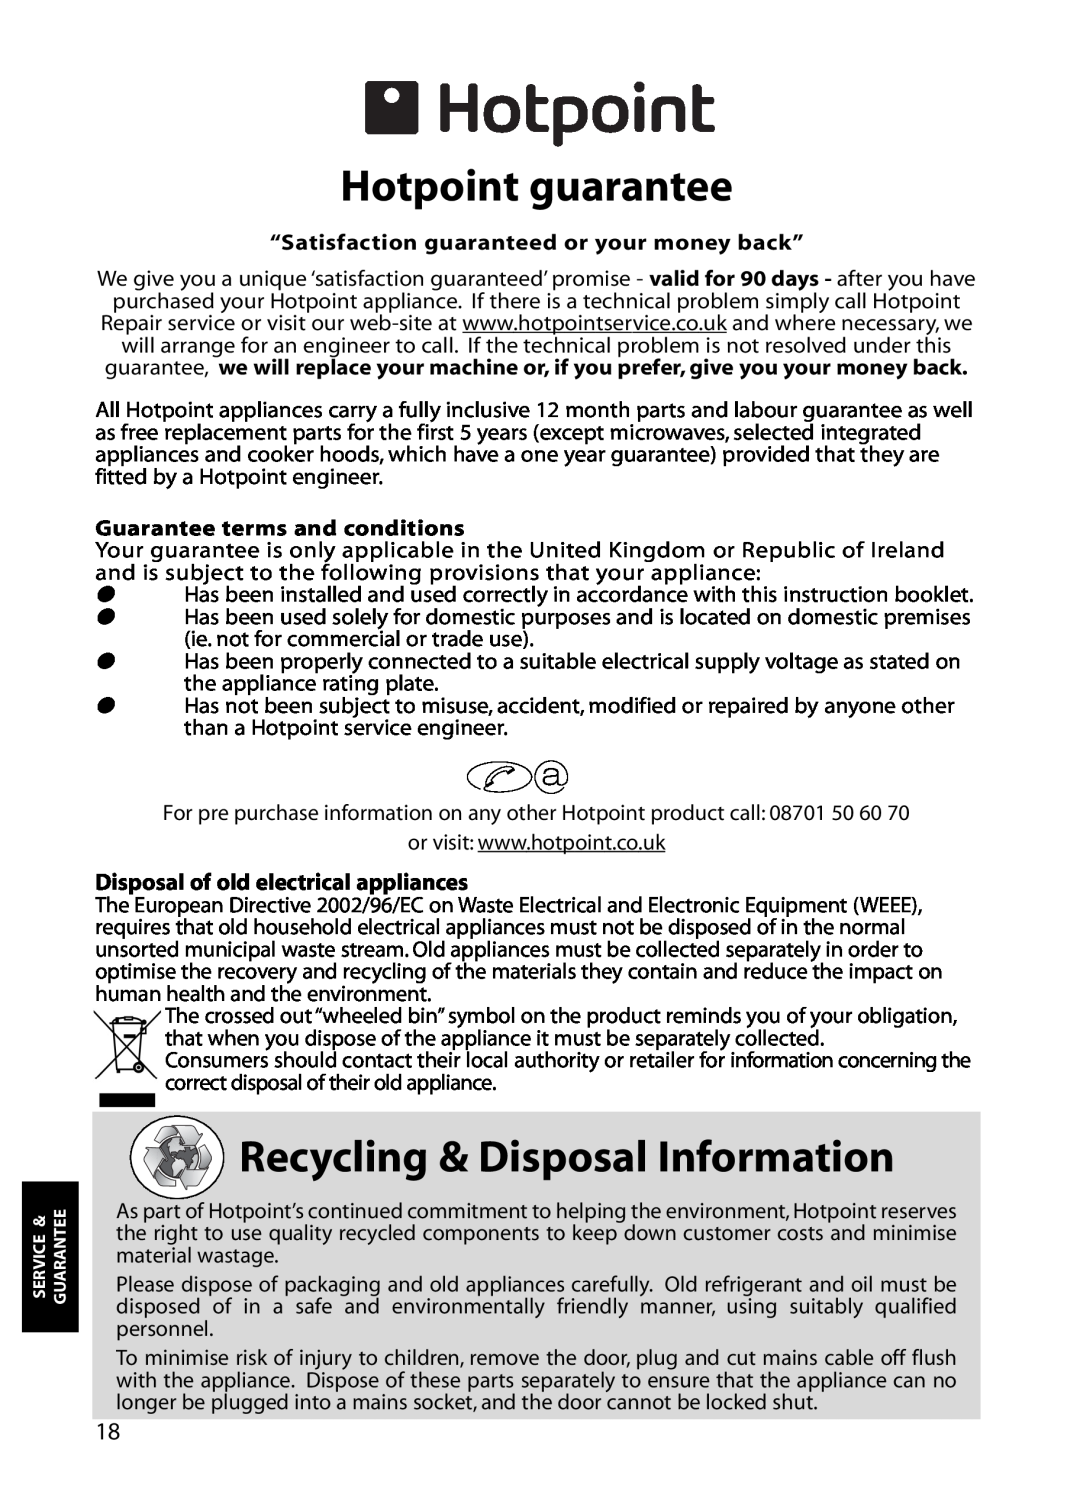 Hotpoint FZA34 manual Hotpoint guarantee, Recycling & Disposal Information, Disposal of old electrical appliances 